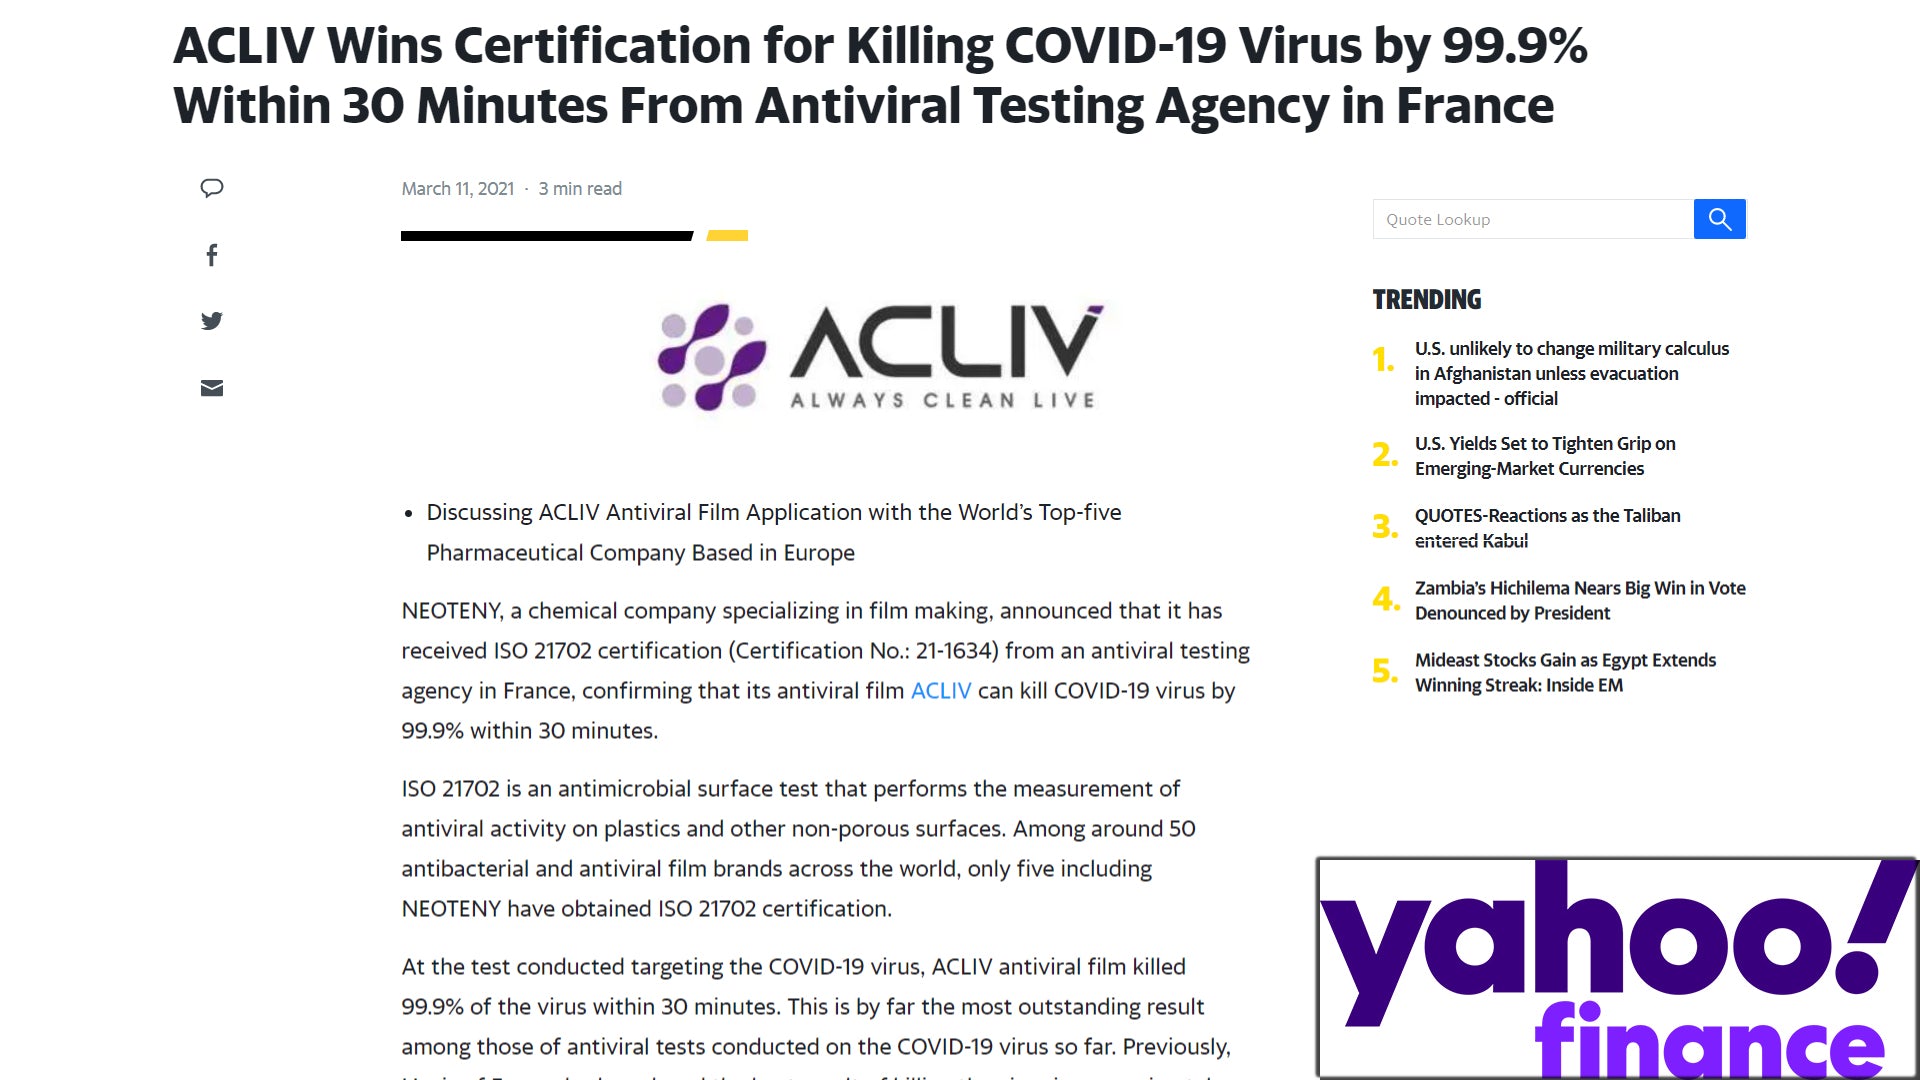 Yahoo! Finance – ACLIV Wins Certification for Killing COVID-19 Virus by 99.9% Within 30 Minutes From Antiviral Testing Agency in France